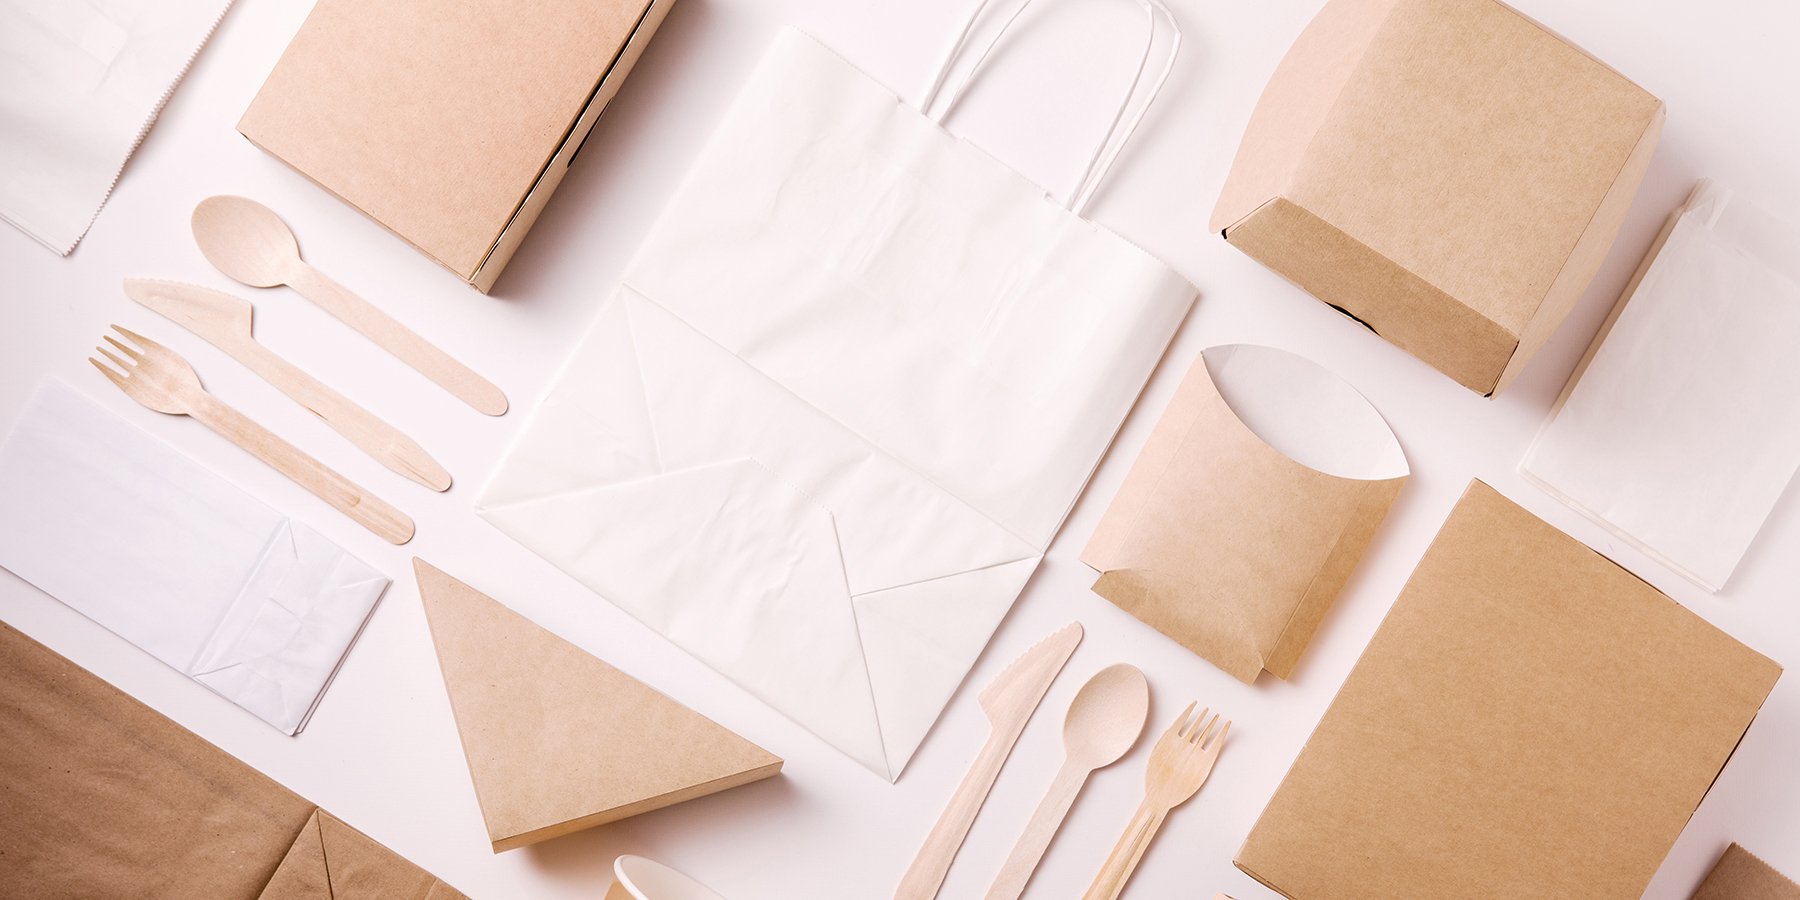 4 Environmentally Sustainable Packaging Trends Every Brand Should Know